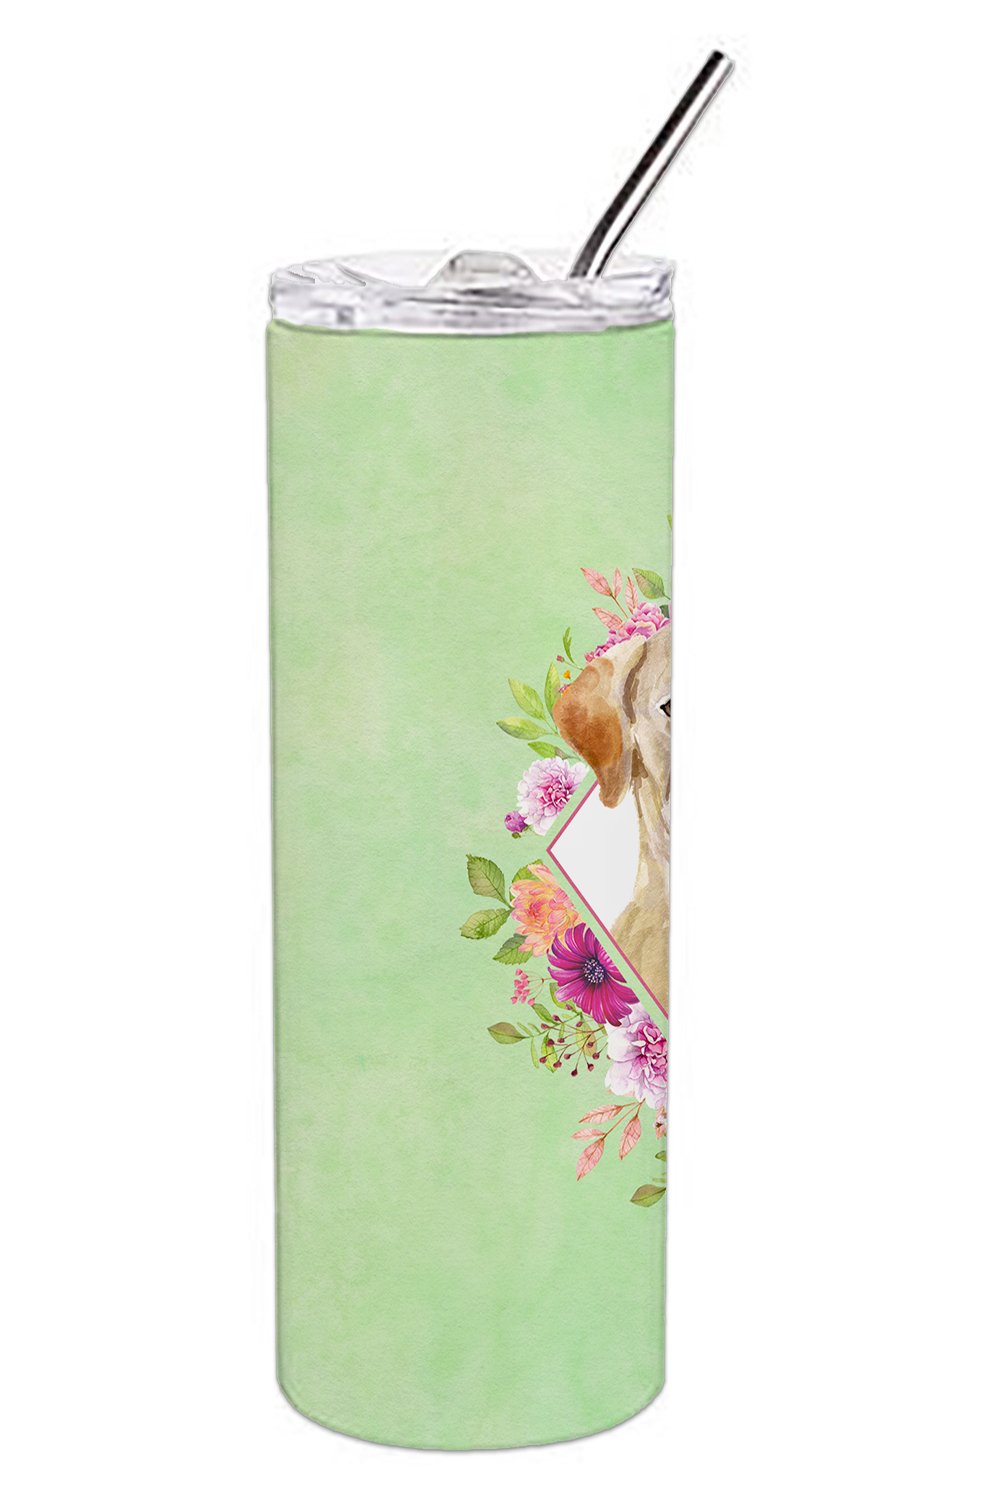 Yellow Lab Green Flowers Double Walled Stainless Steel 20 oz Skinny Tumbler CK4387TBL20 by Caroline's Treasures